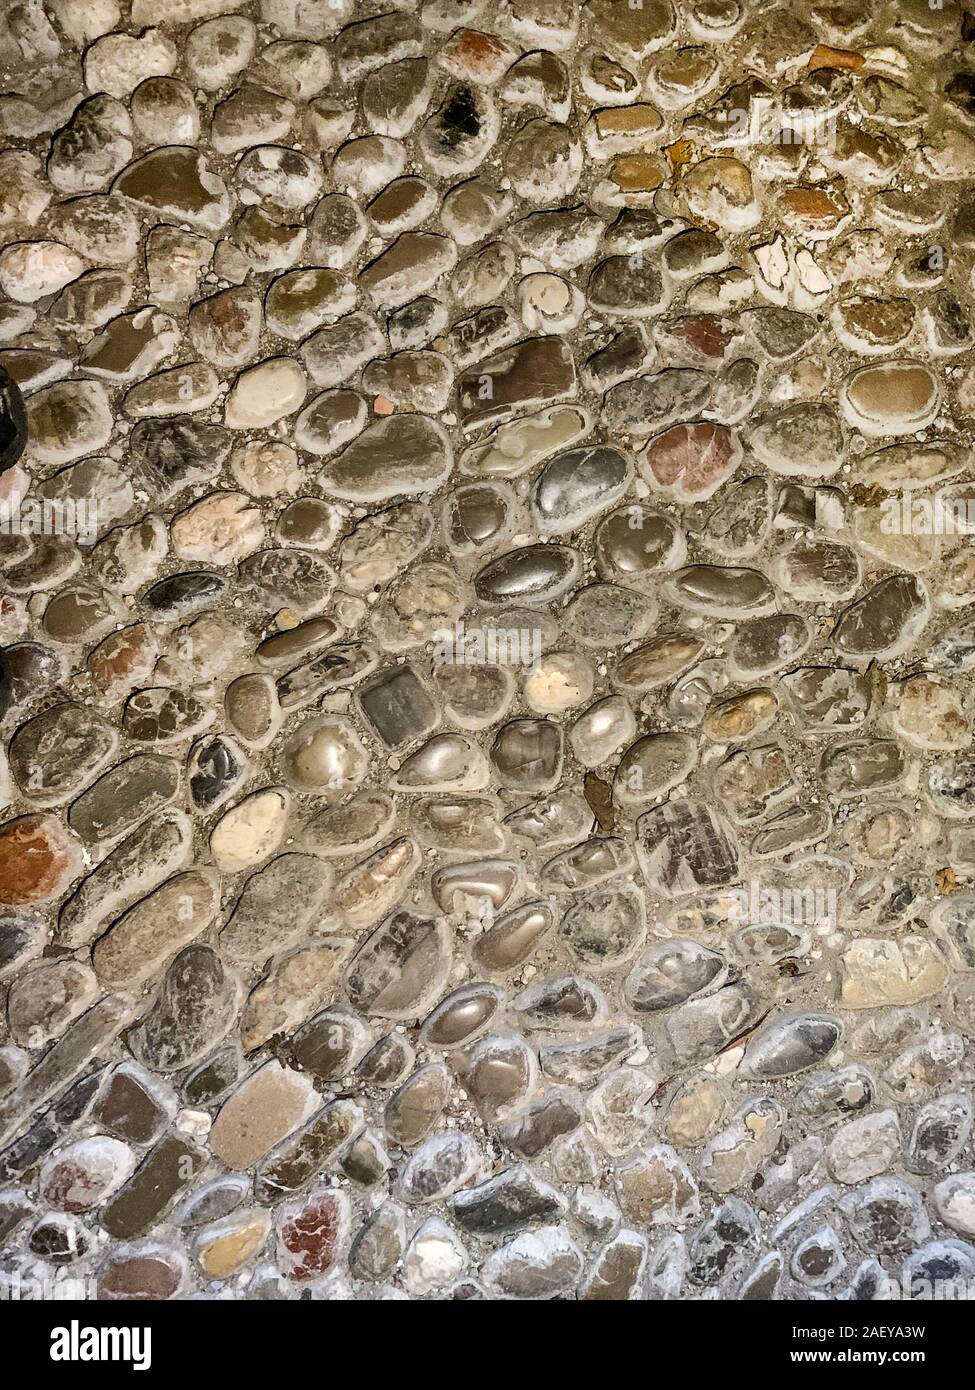 Ancient floor made of round pebbles from the Middle Ages. Flooring, made of selected and hand-sorted stones in mortar, with intensive signs of wear. Stock Photo